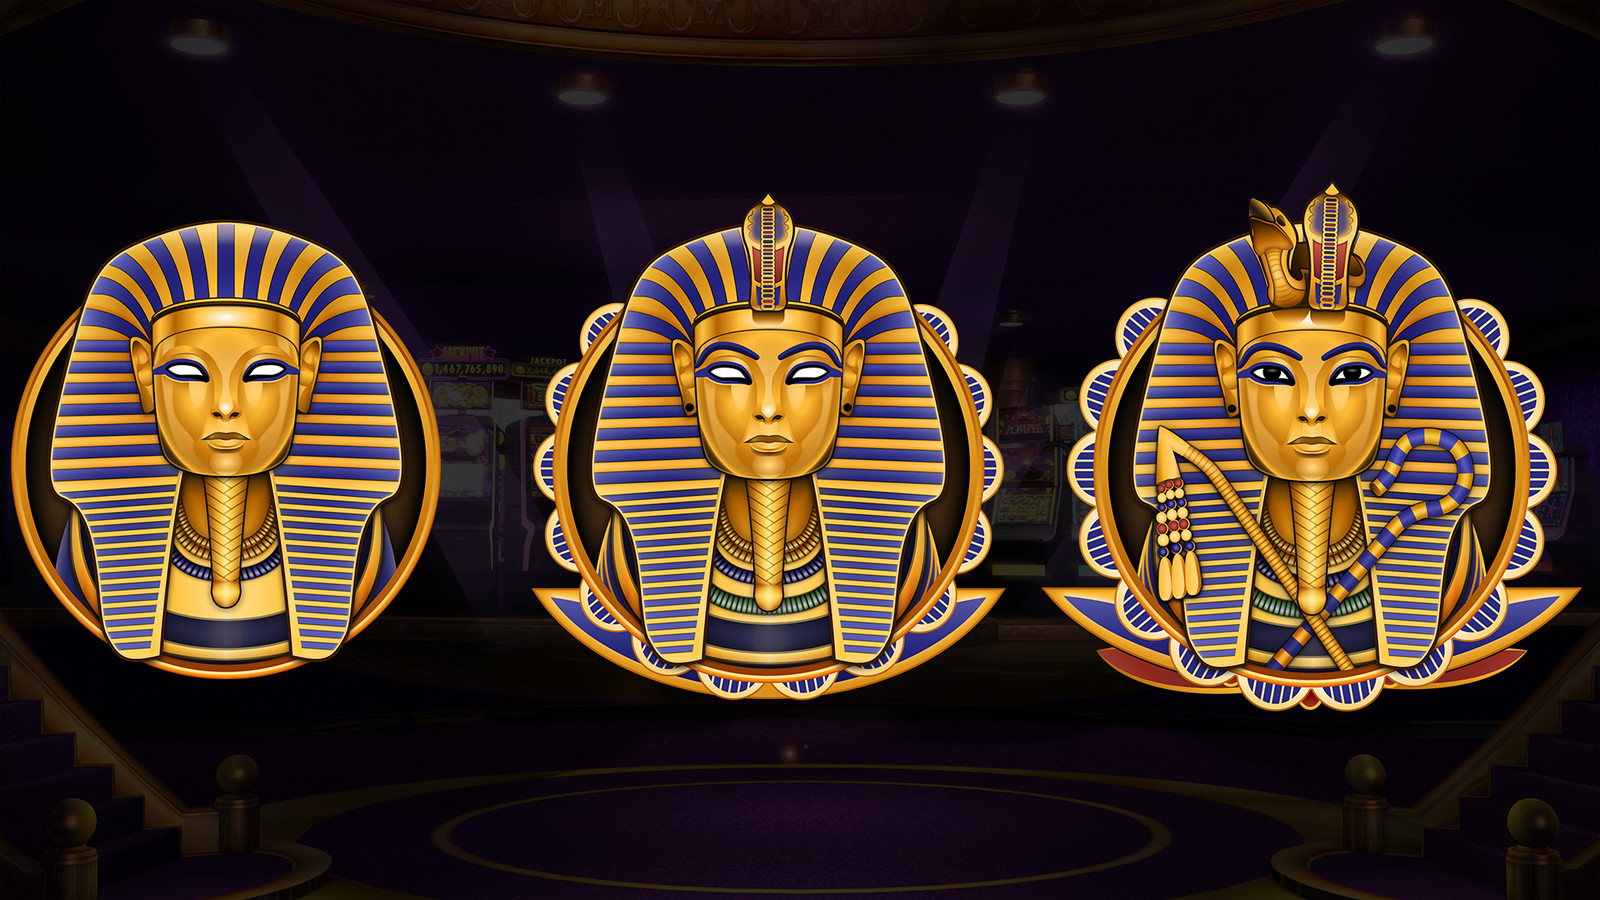 Pharaohs badge with its two upgrades designed entirely by myself with Illustrator, using mostly gradients and shadow effects.